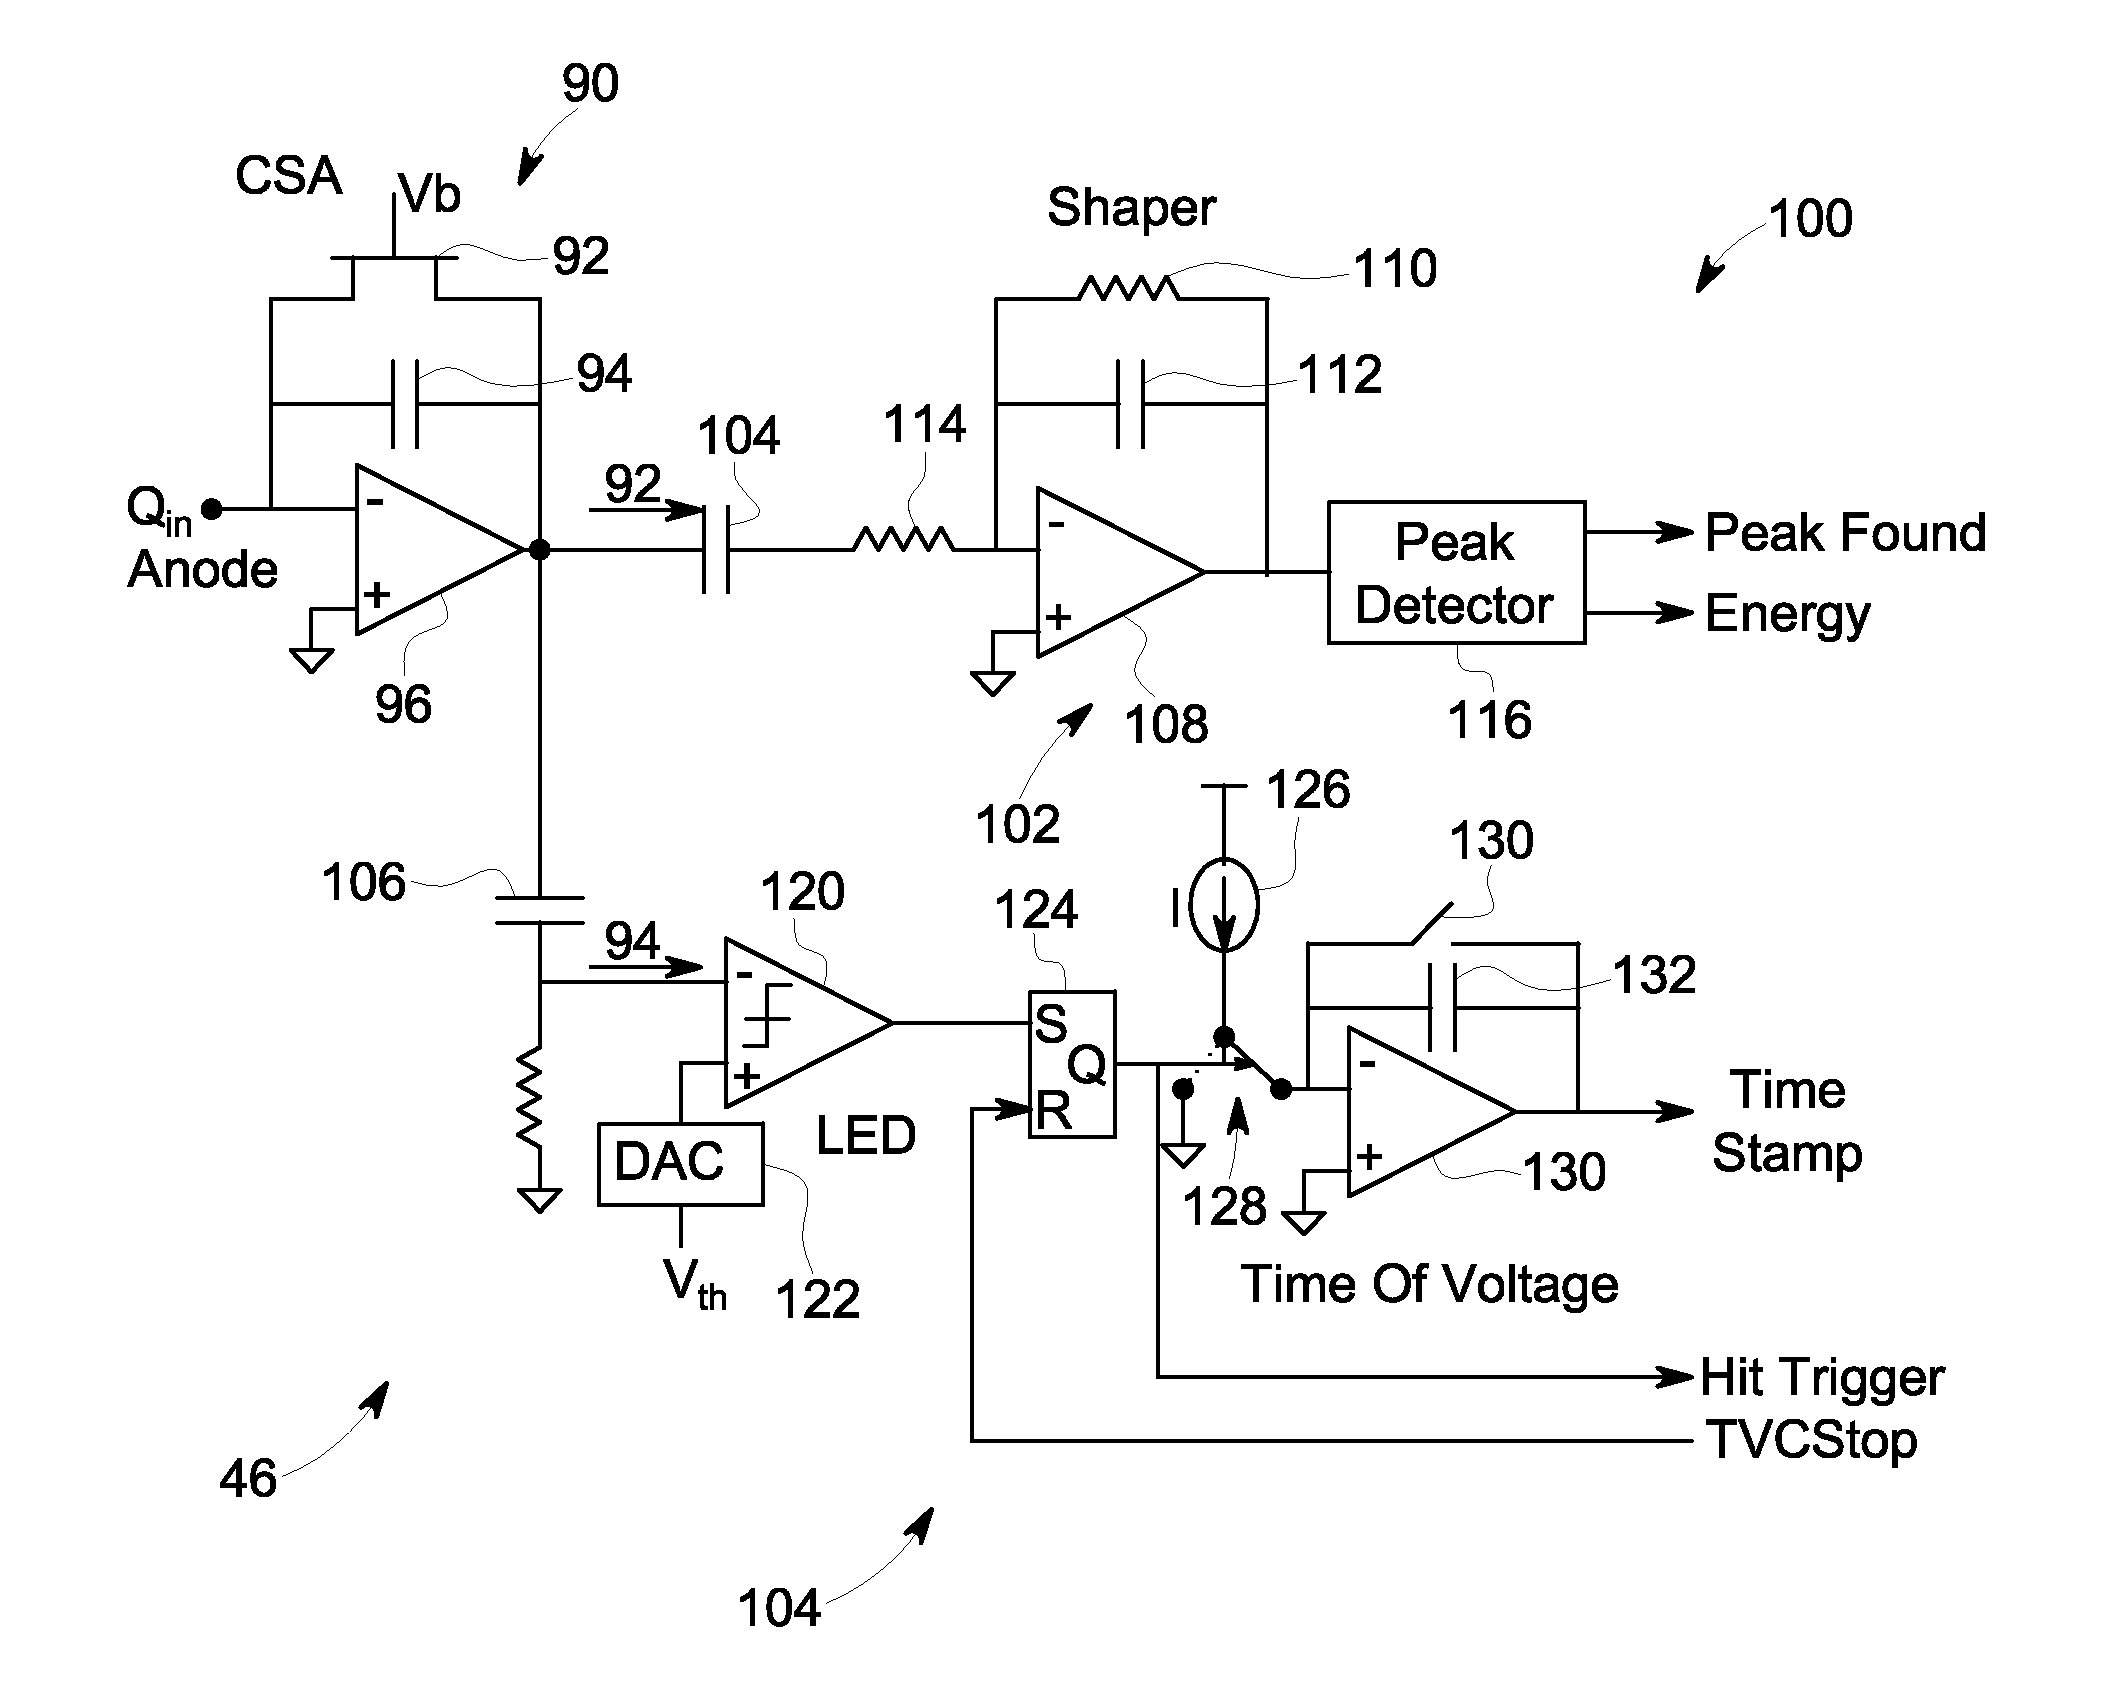 Systems and methods for generating control signals in radiation detector systems